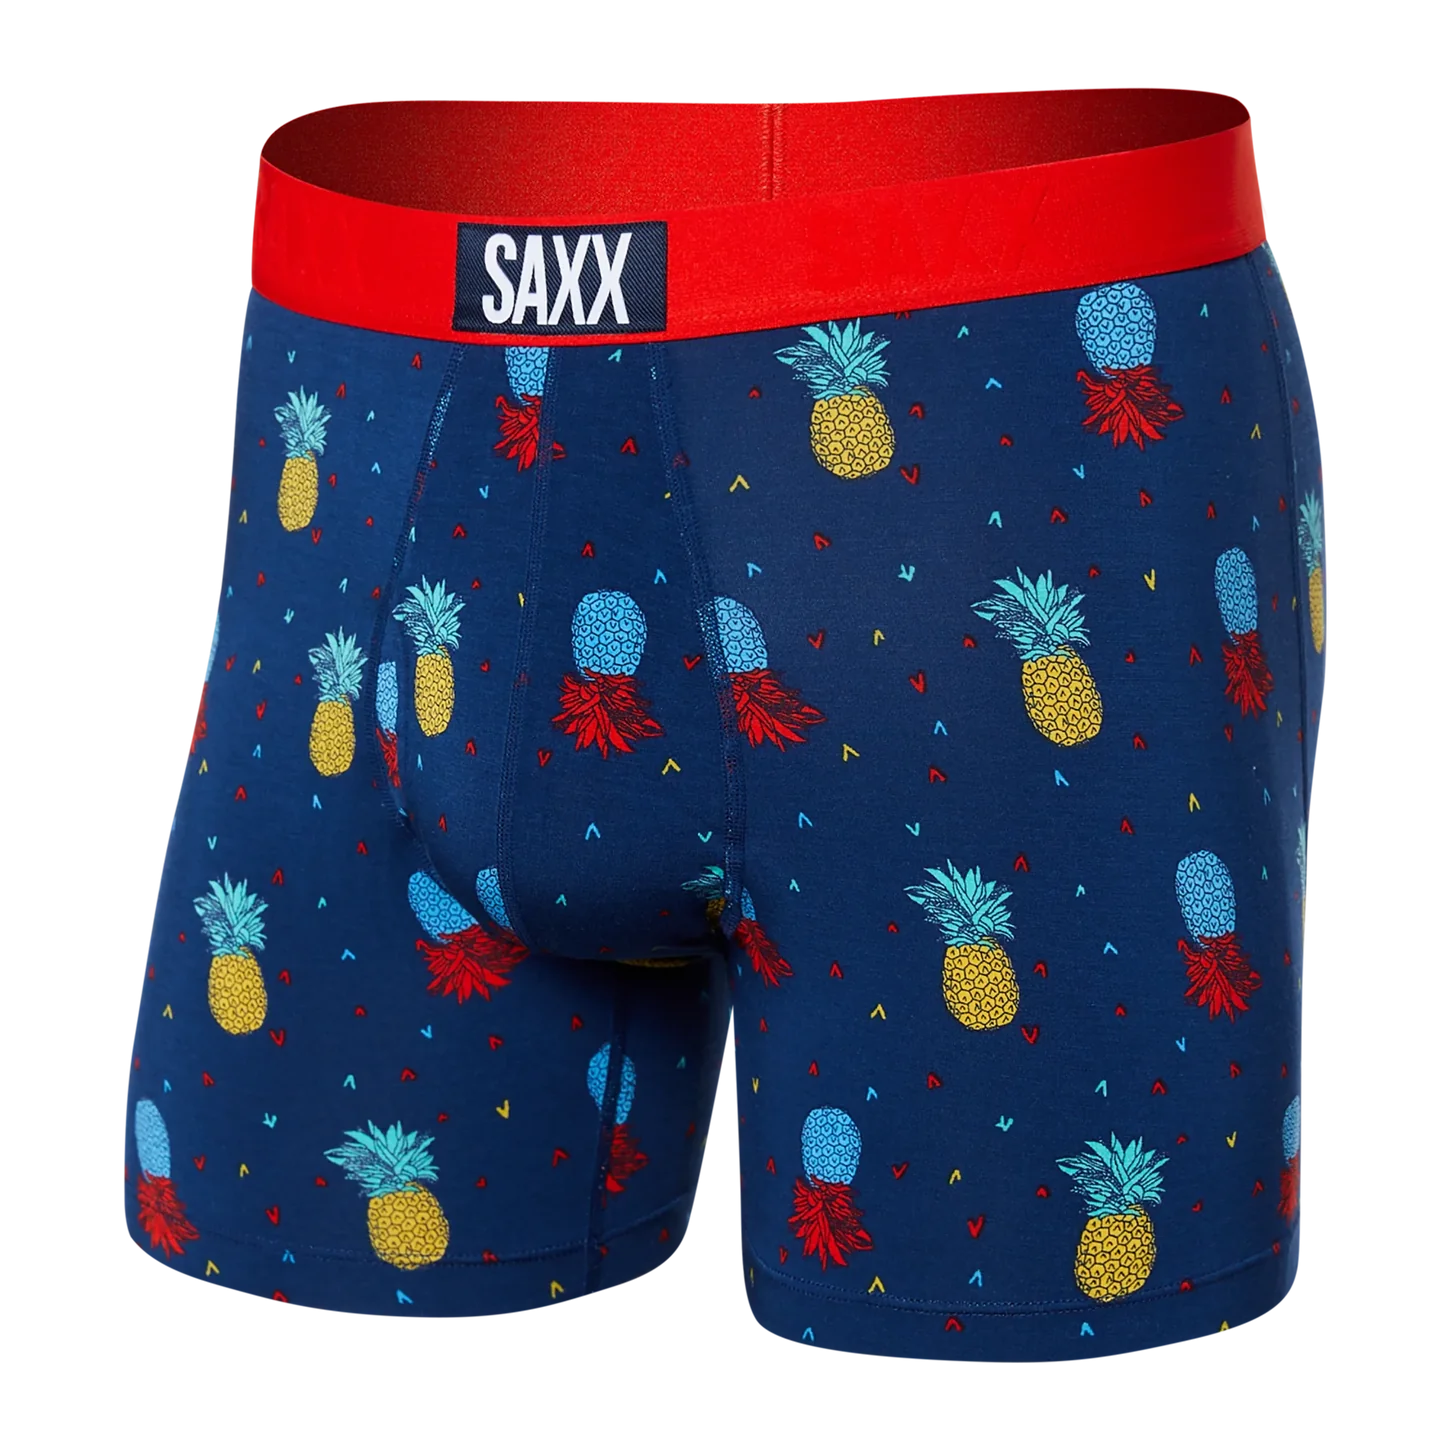 Ultra Boxer Brief (With Fly Opening) Underwear Saxx PFN S 